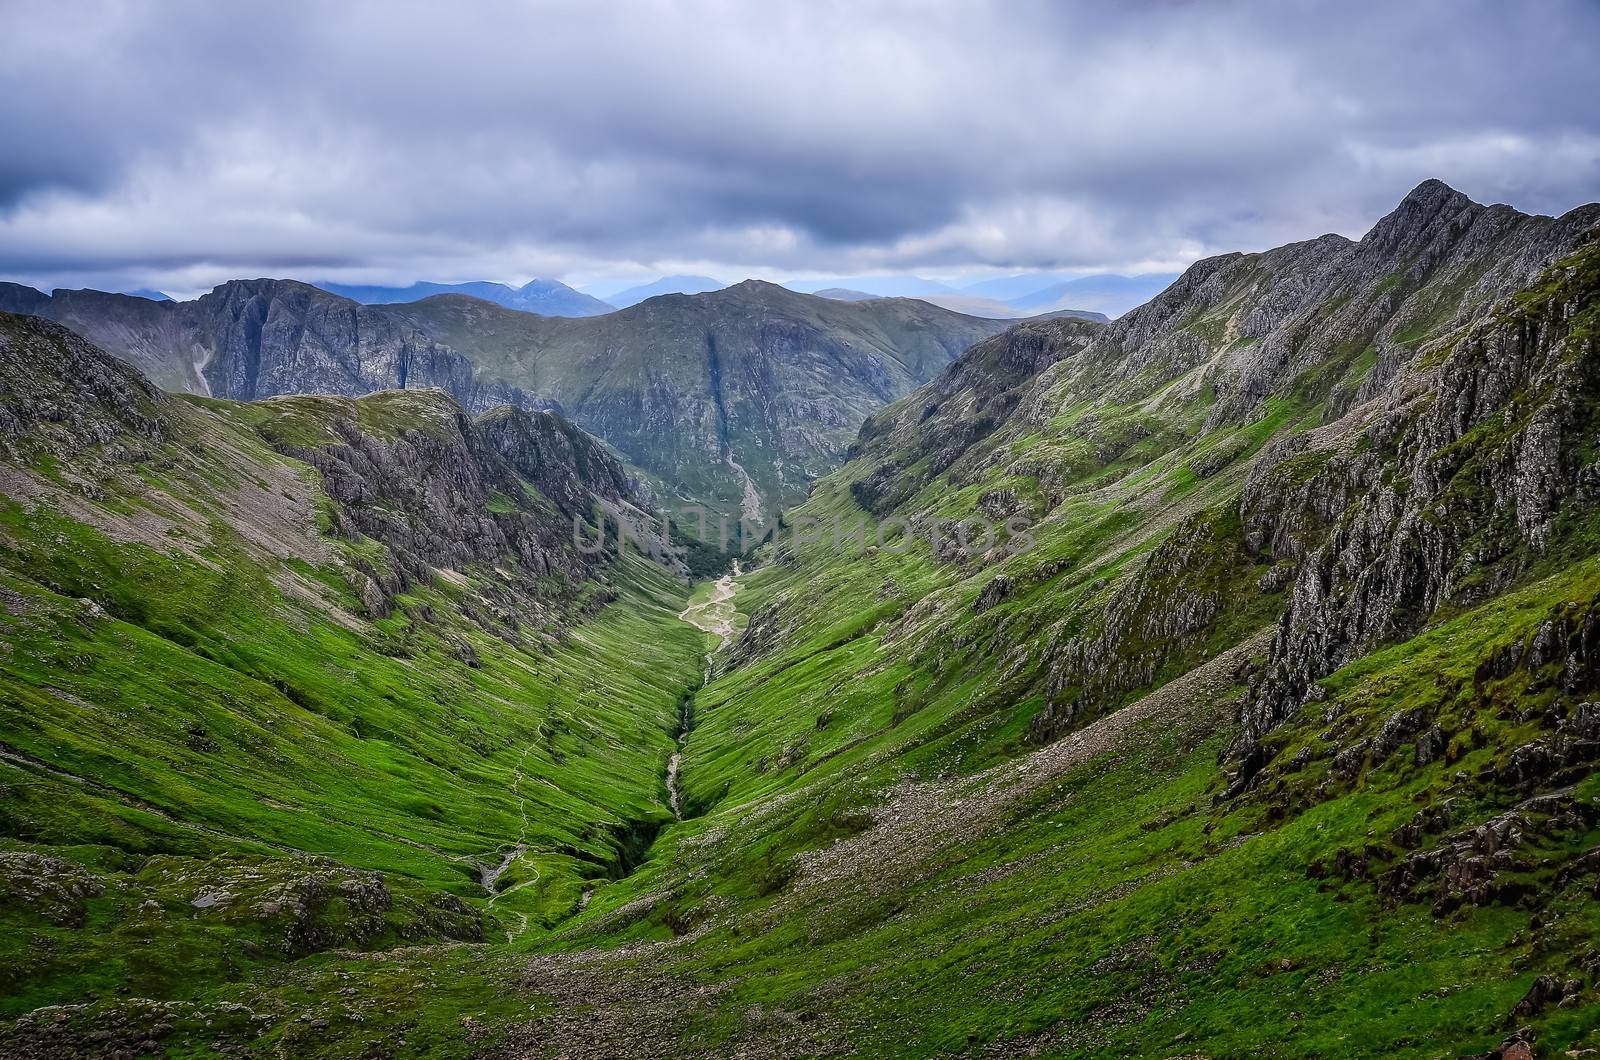 View of beautiful mountains in Glen Coe valley, Scotland, Great Britain